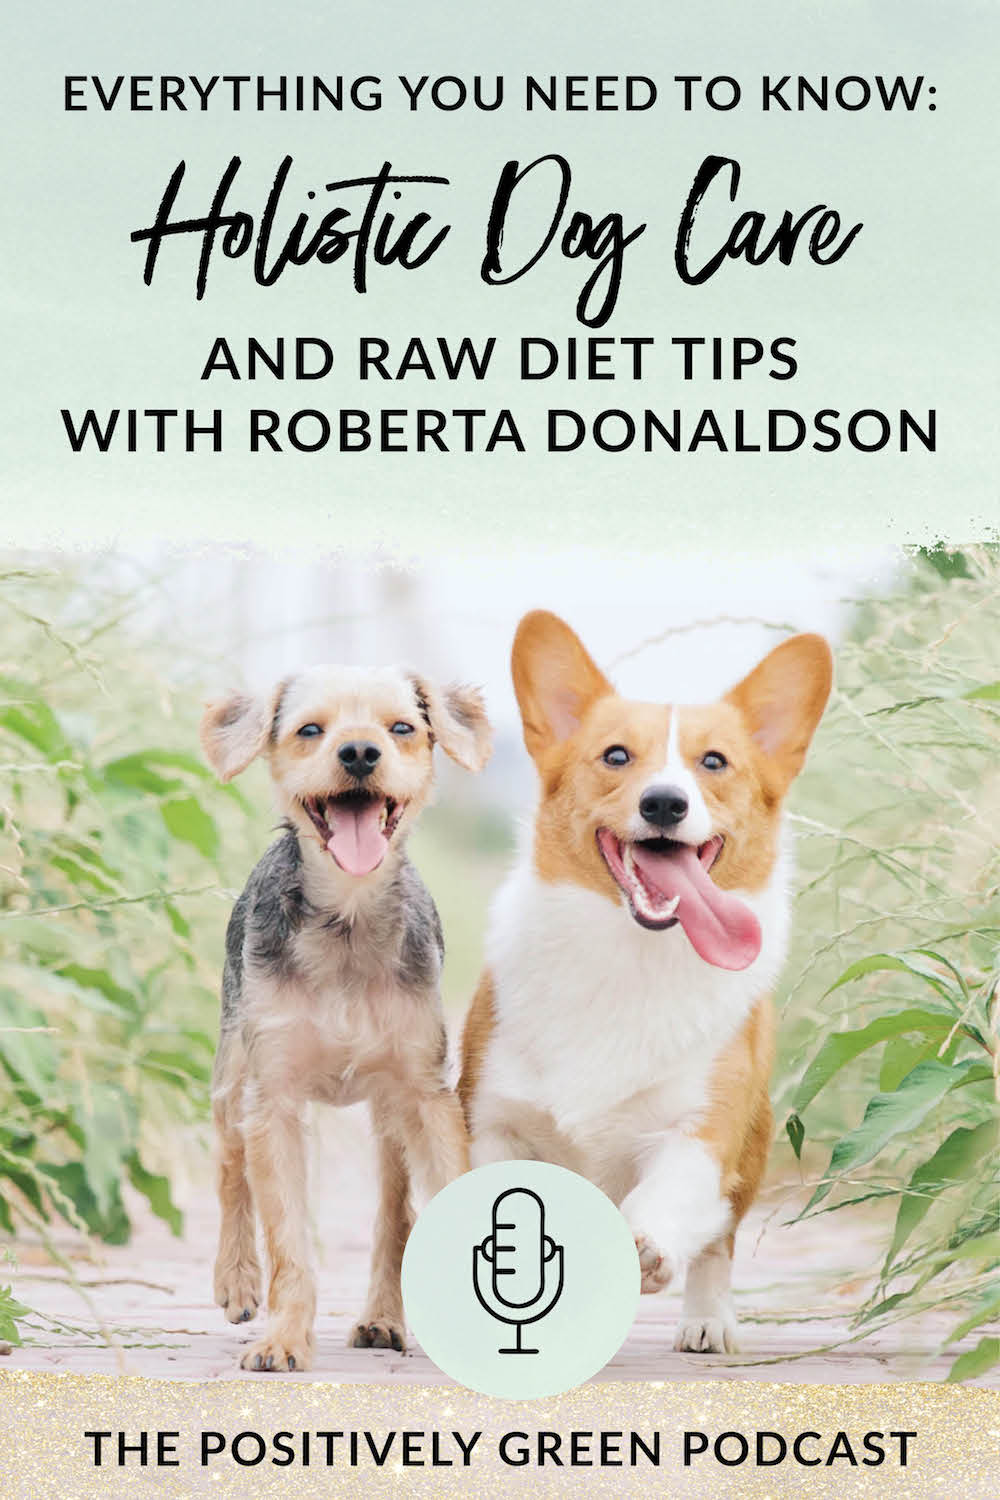 Holistic Dog Care and Raw Diet Tips - Episode 28 of The Positively Green Podcast